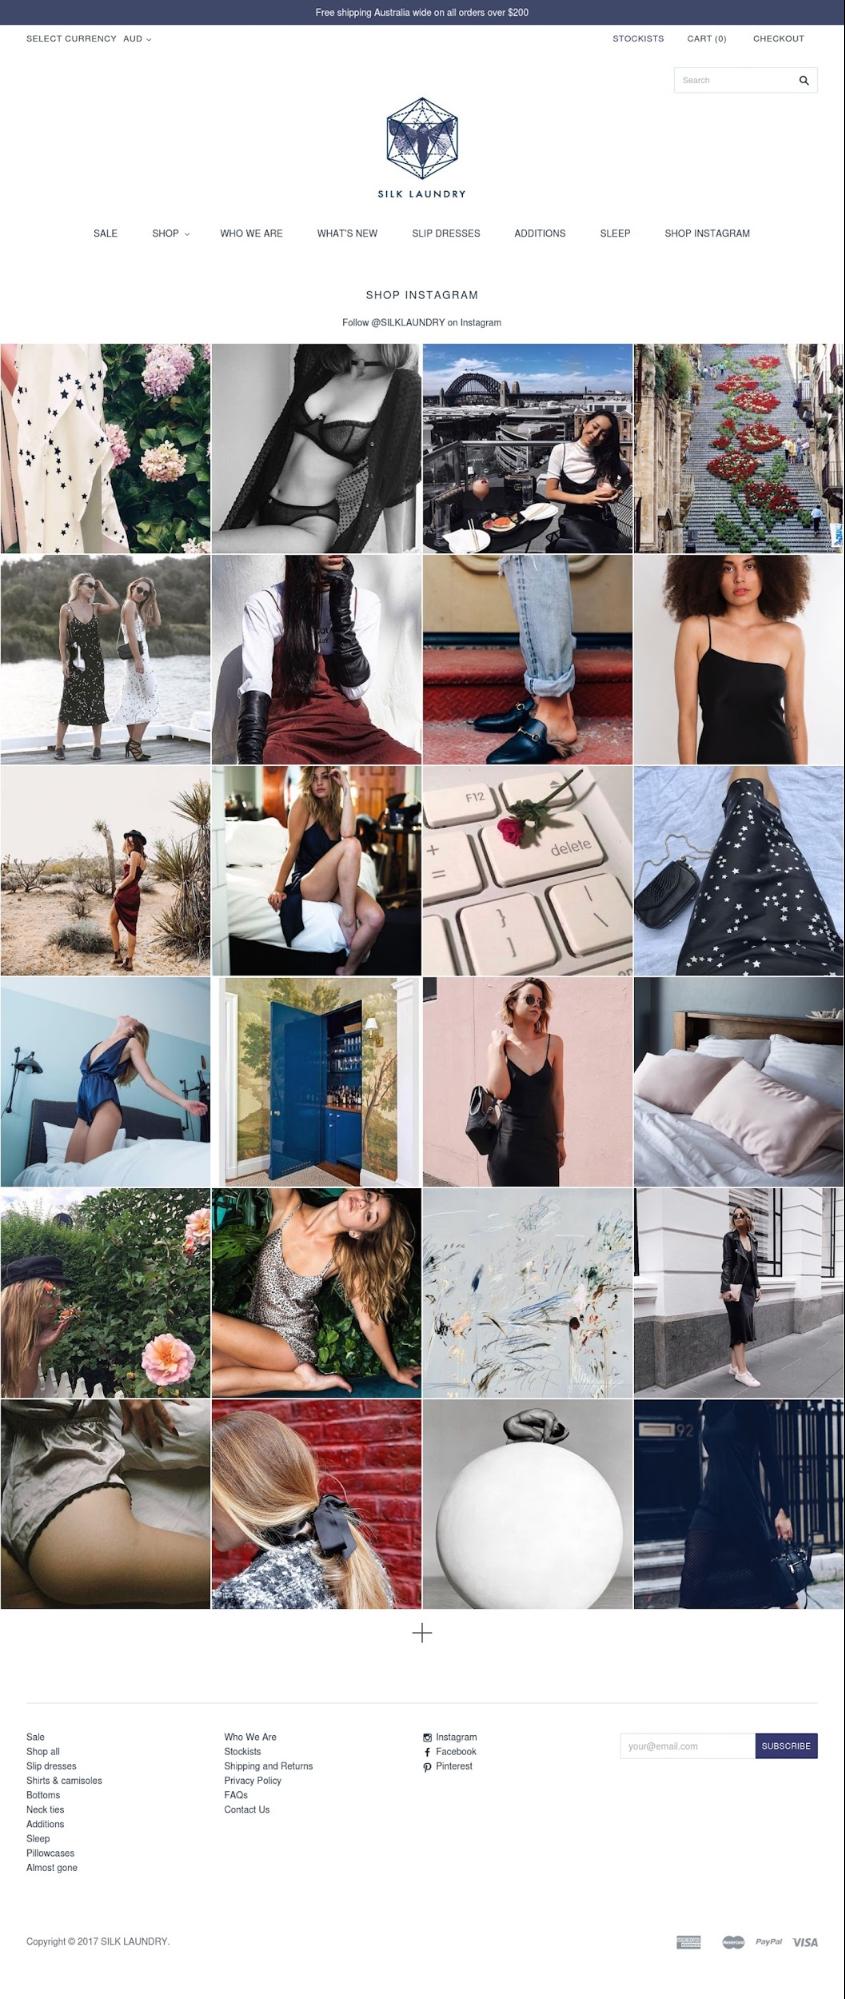 Successful Marketing Campaigns: Silk laundry Shop instagram page